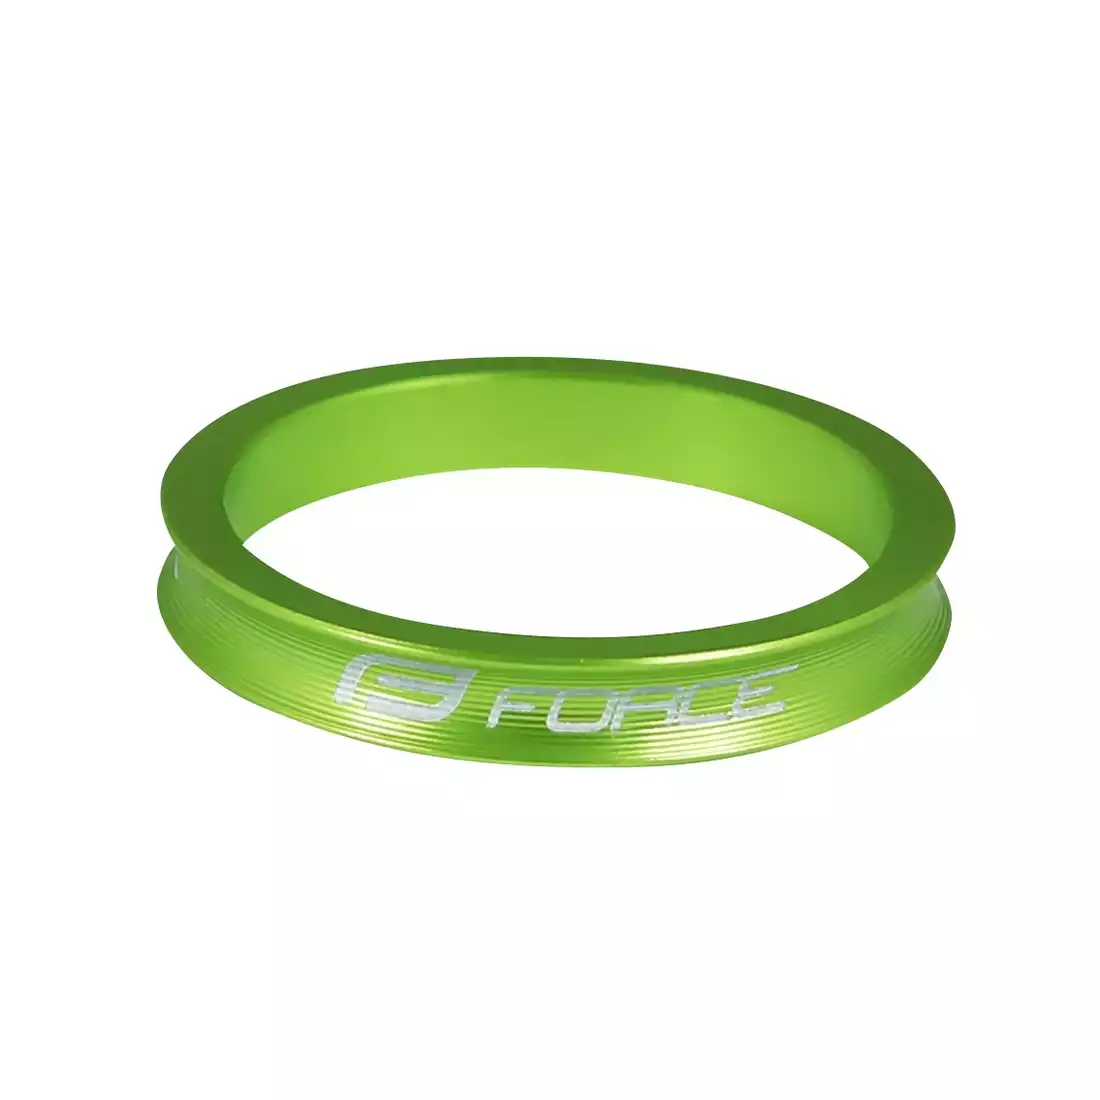 FORCE AHEAD Pad for bicycle rudders 1 1/8“, green